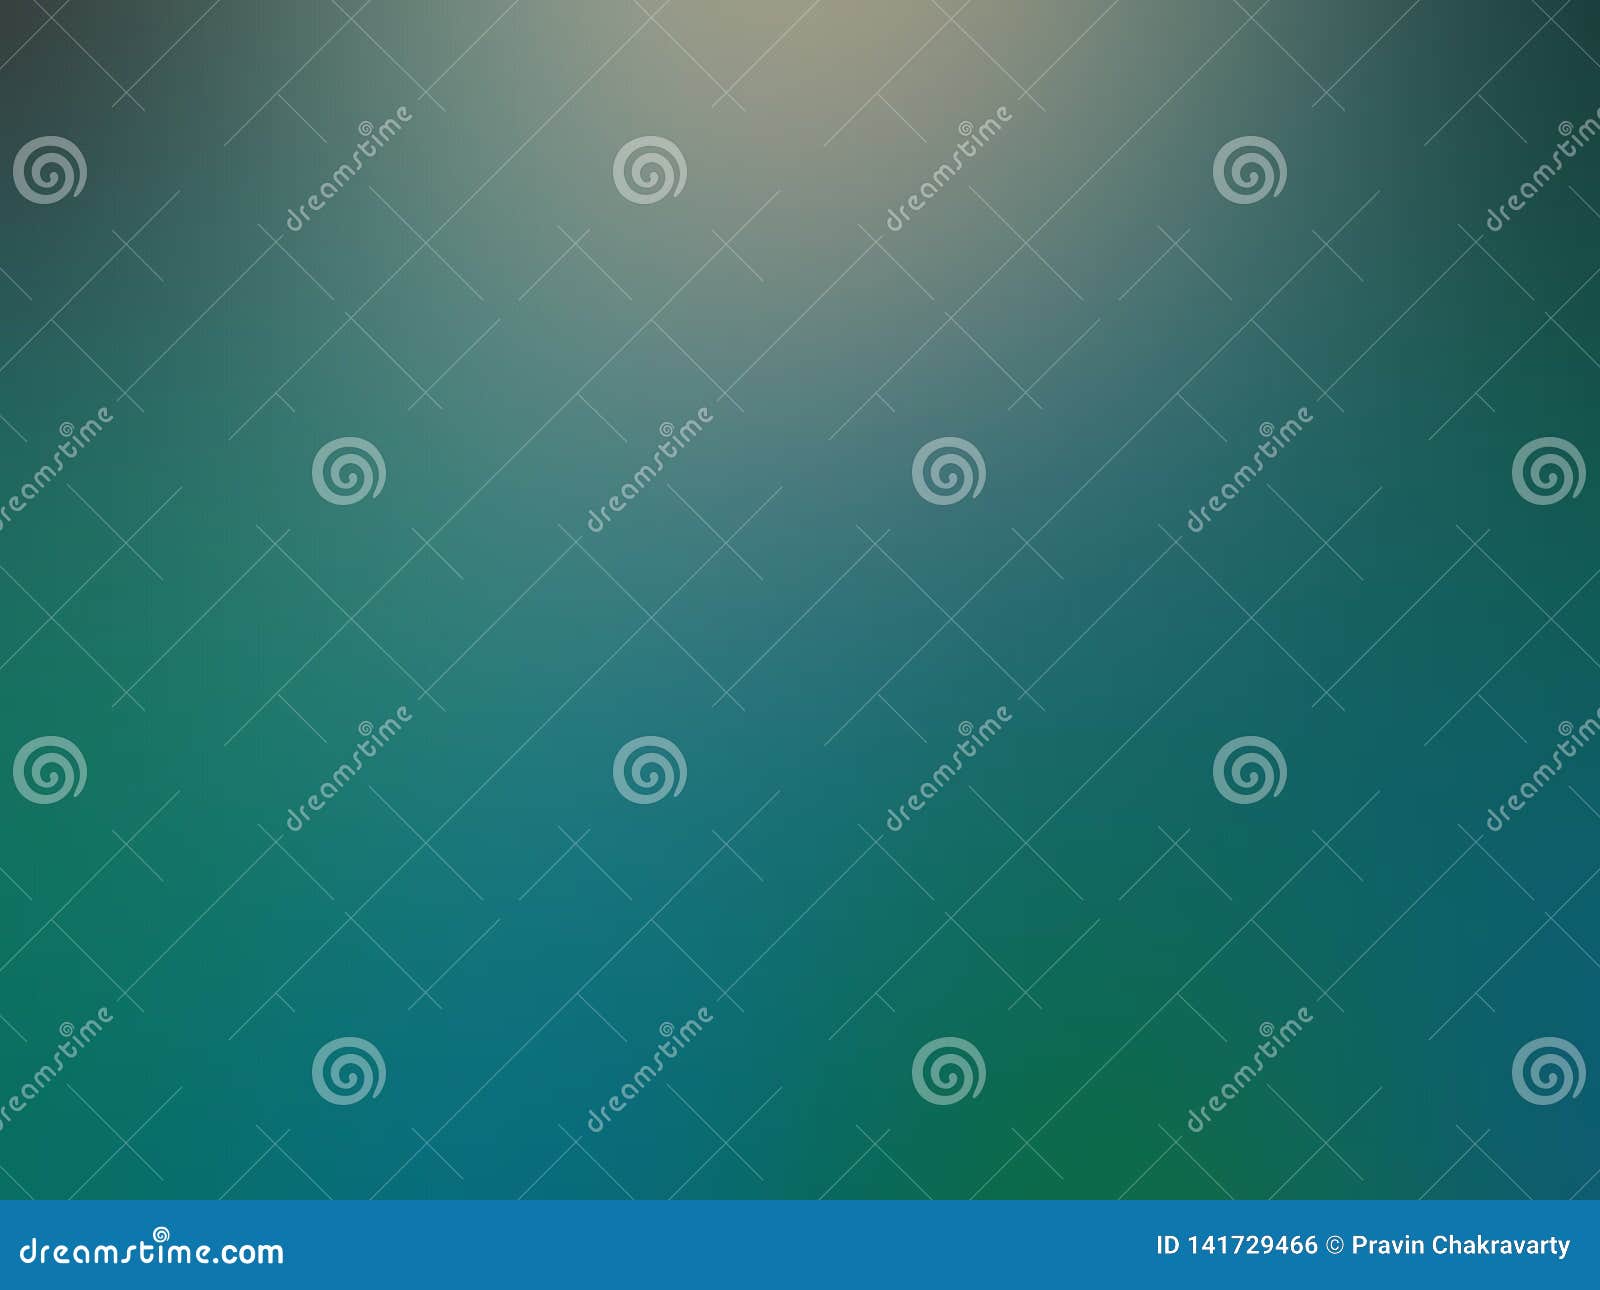 Colorful Blur Abstract Background Vector Design, Colorful Blurred ...